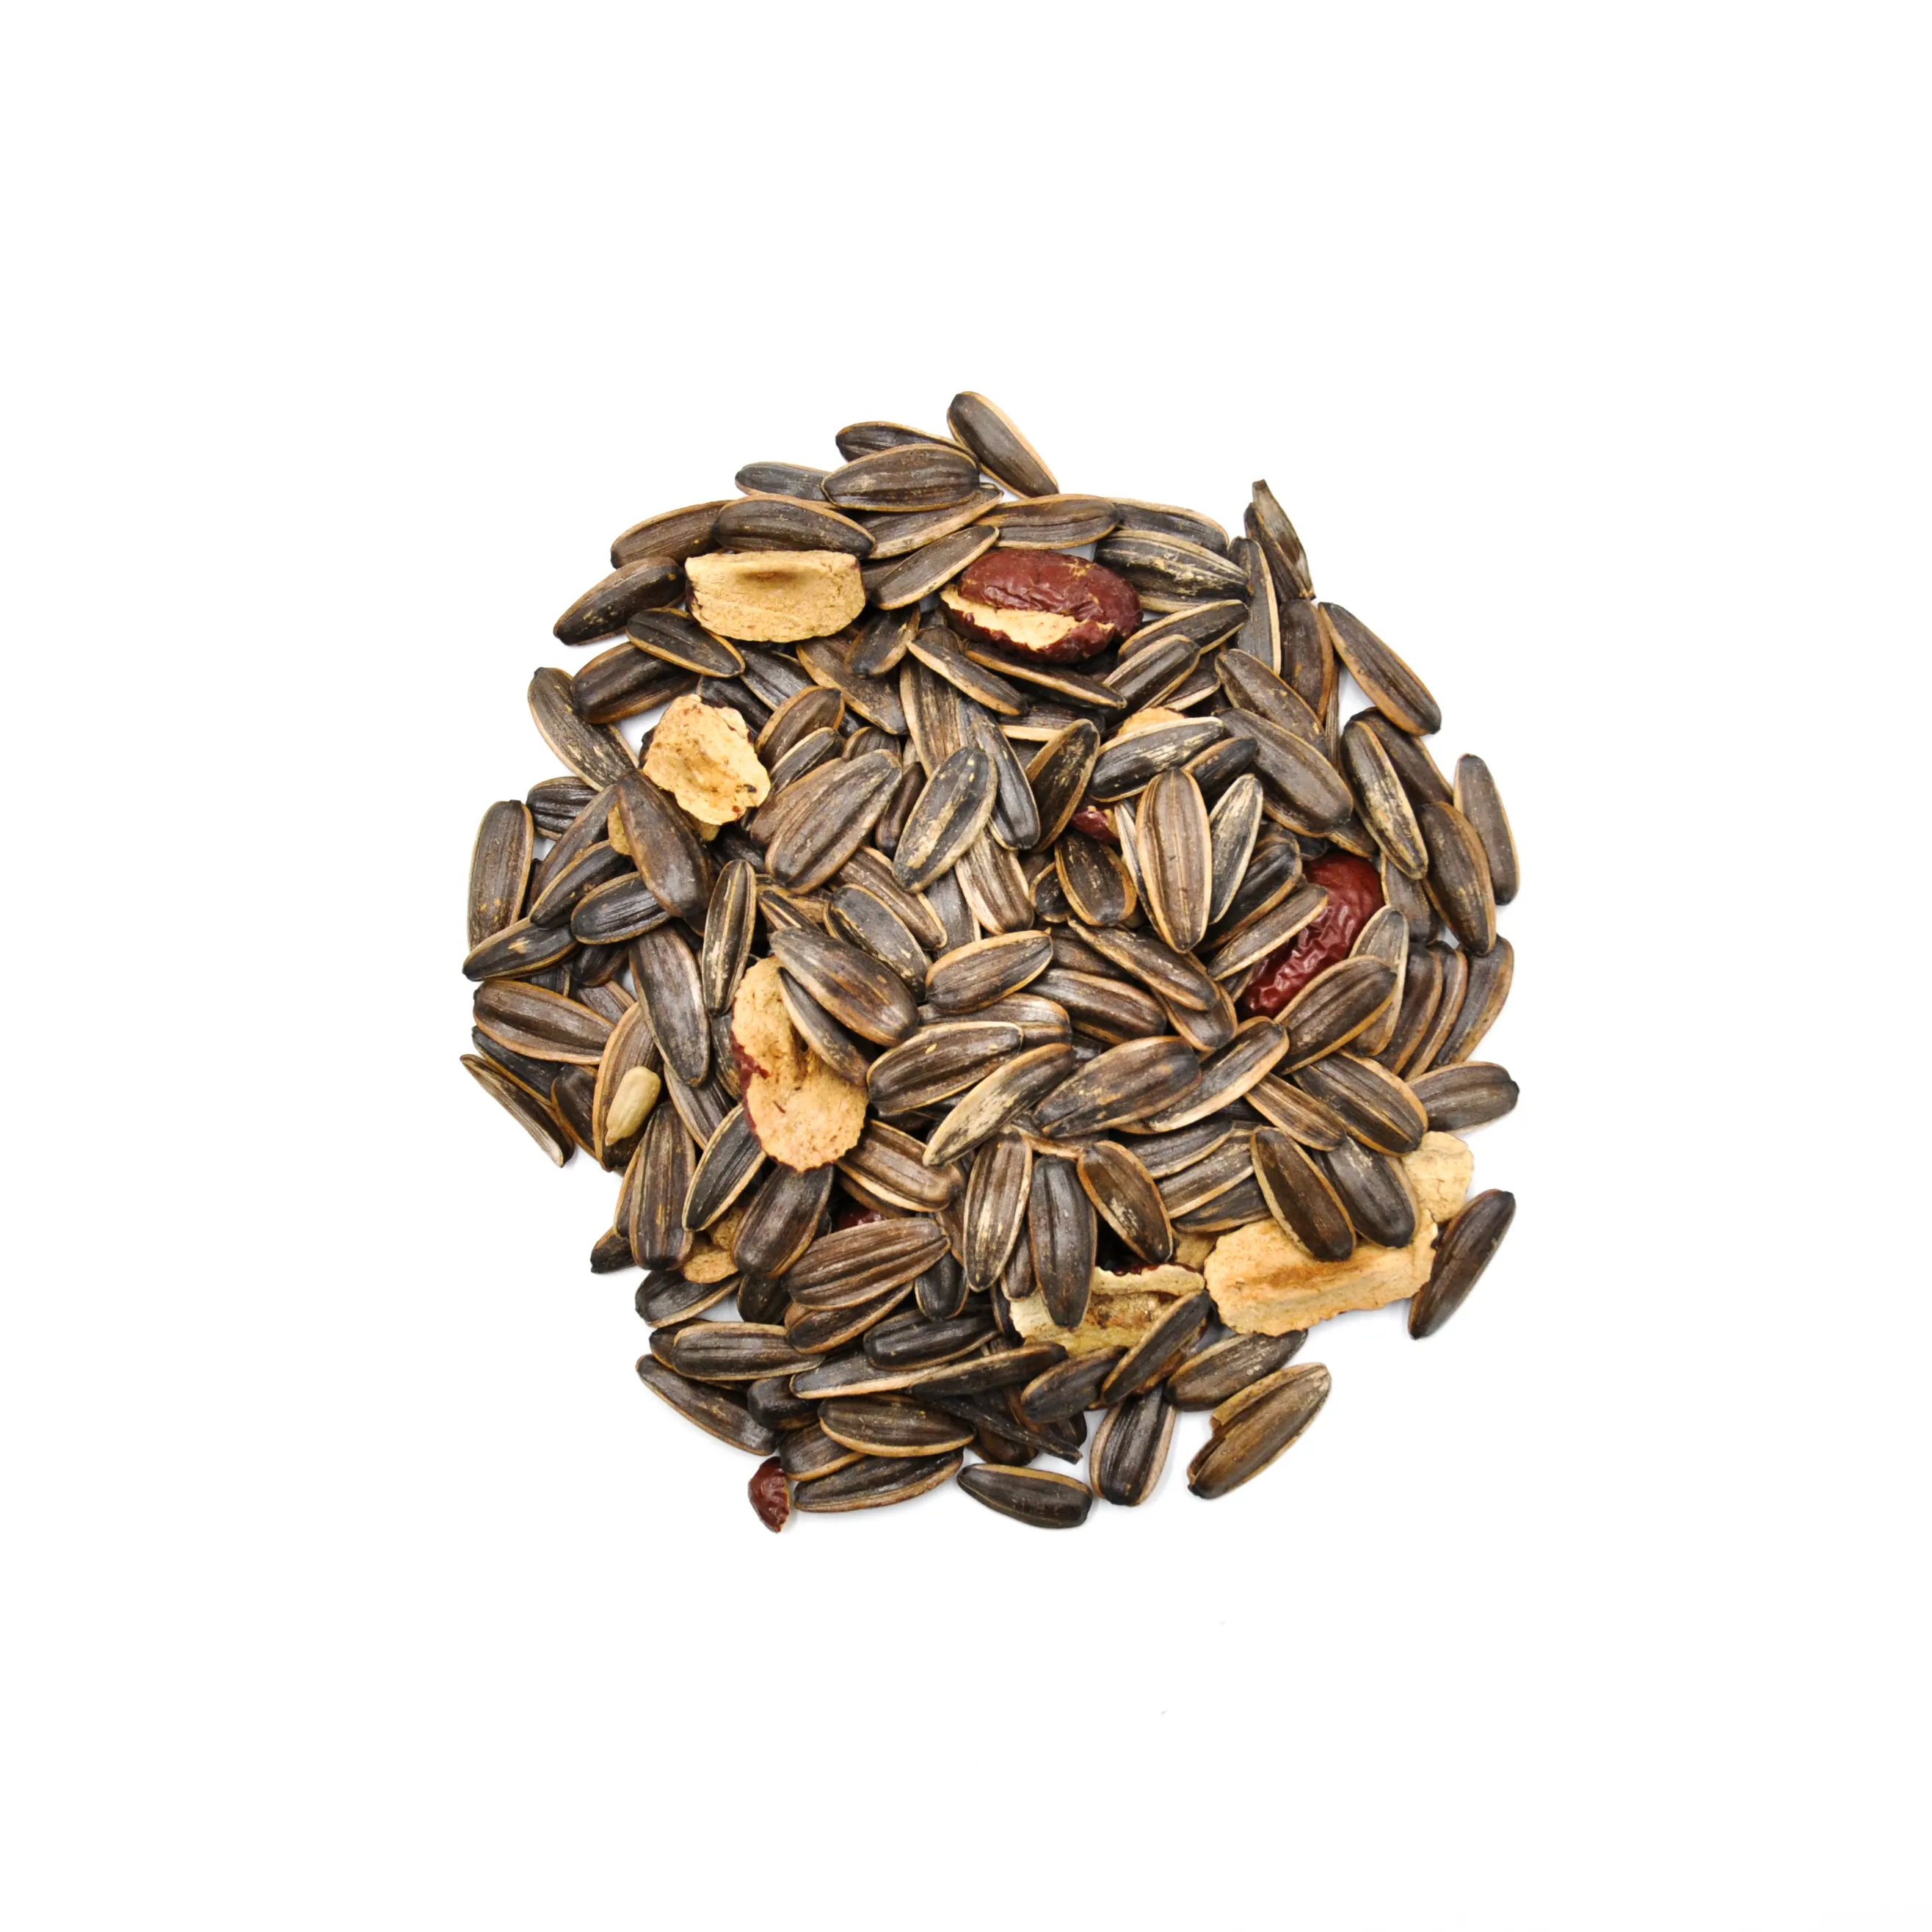 Certificated sunflower seeds healthy organic roasted cheap nutrient sunflower seeds for baking